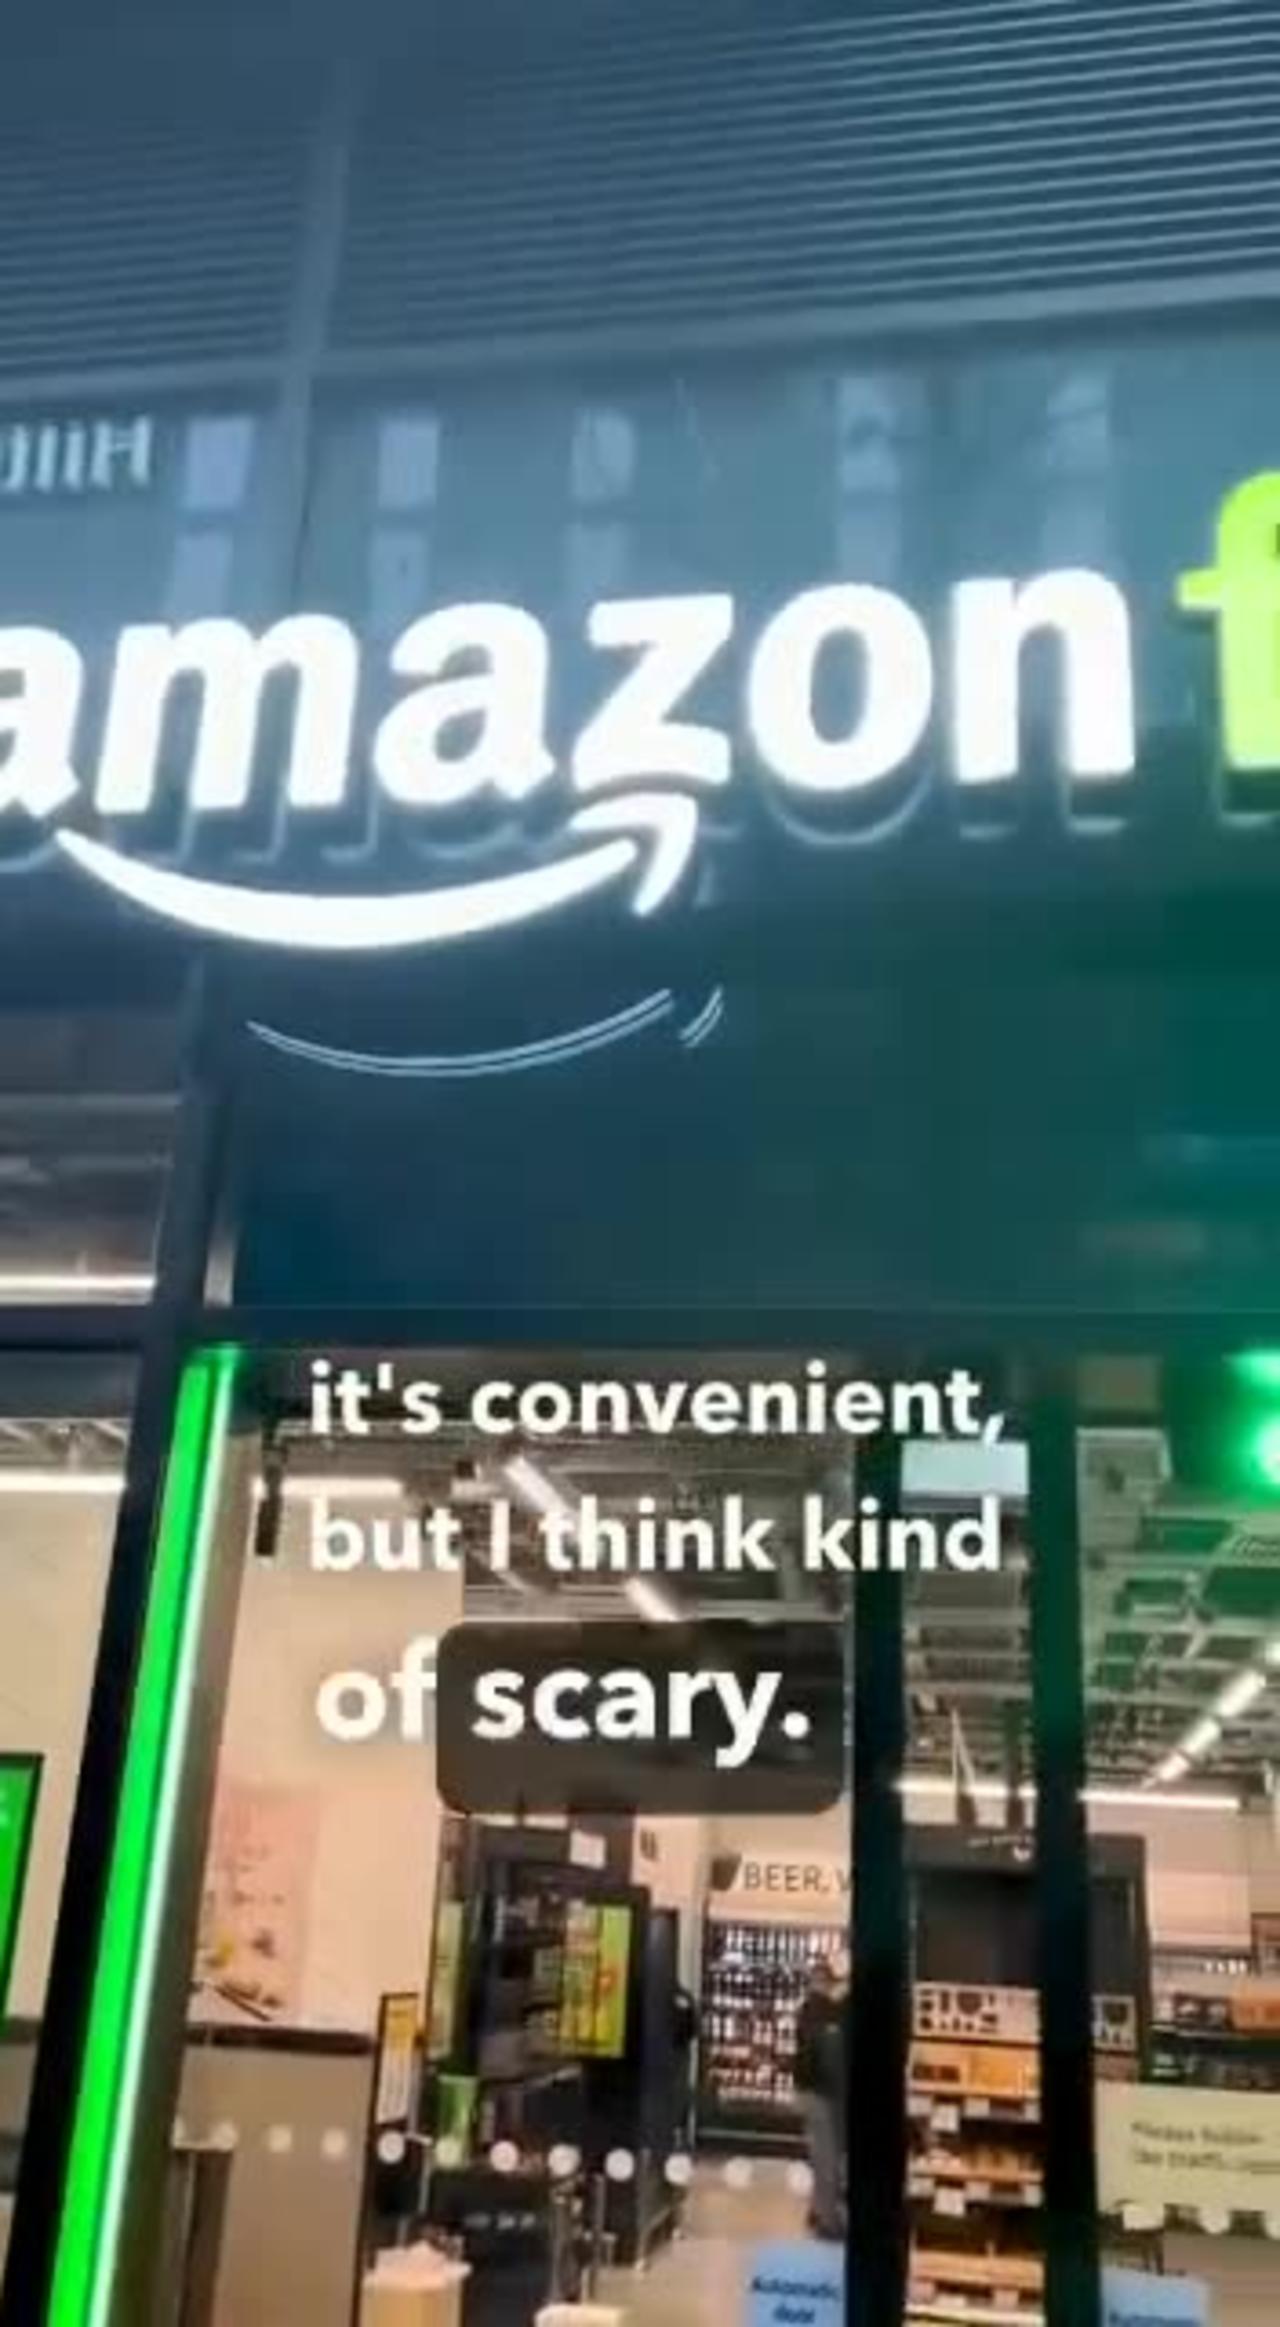 Amazon store in London, the future of grocery shopping (2 minutes)